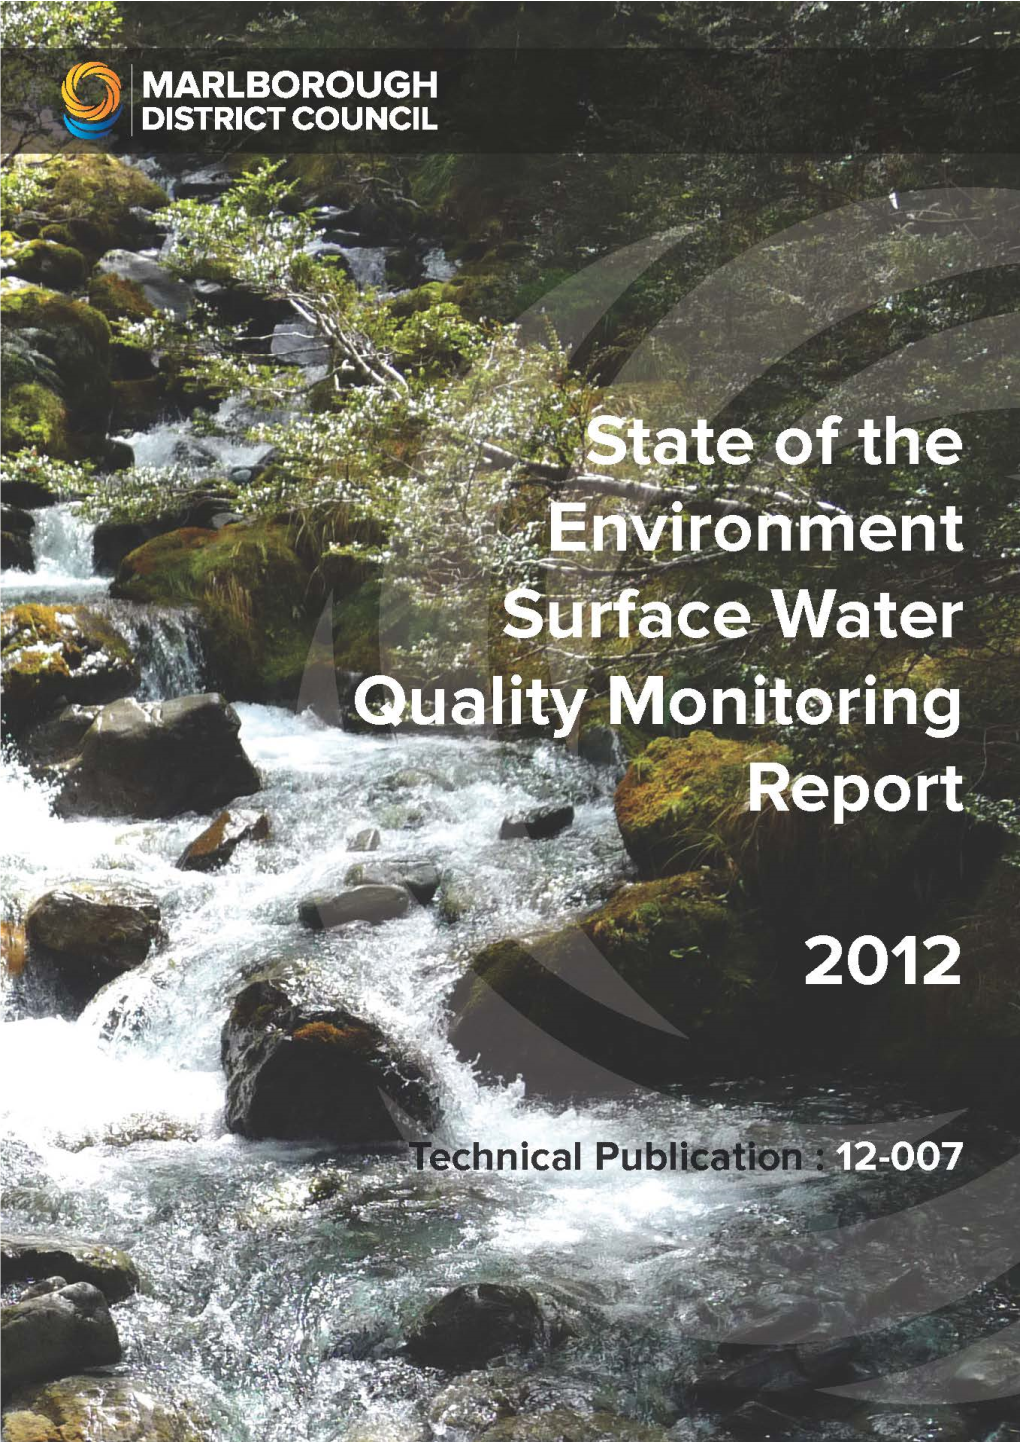 State of the Environment Surface Water Quality Monitoring Report, 2012